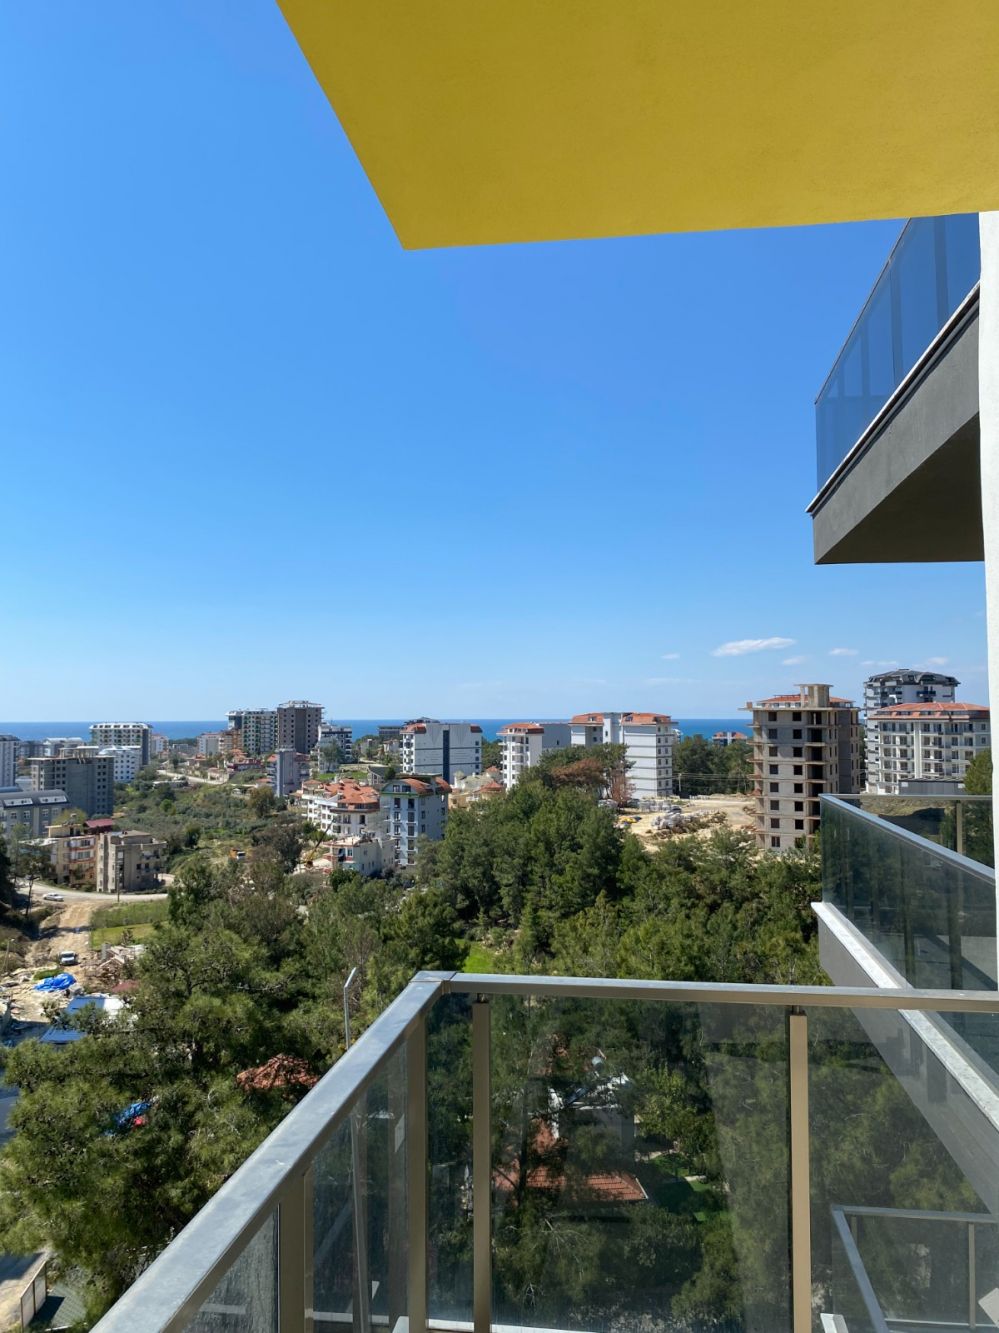 One-bedroom apartment 53m², unfurnished, in a new residential residence with facilities, in Avsallar, Alanya